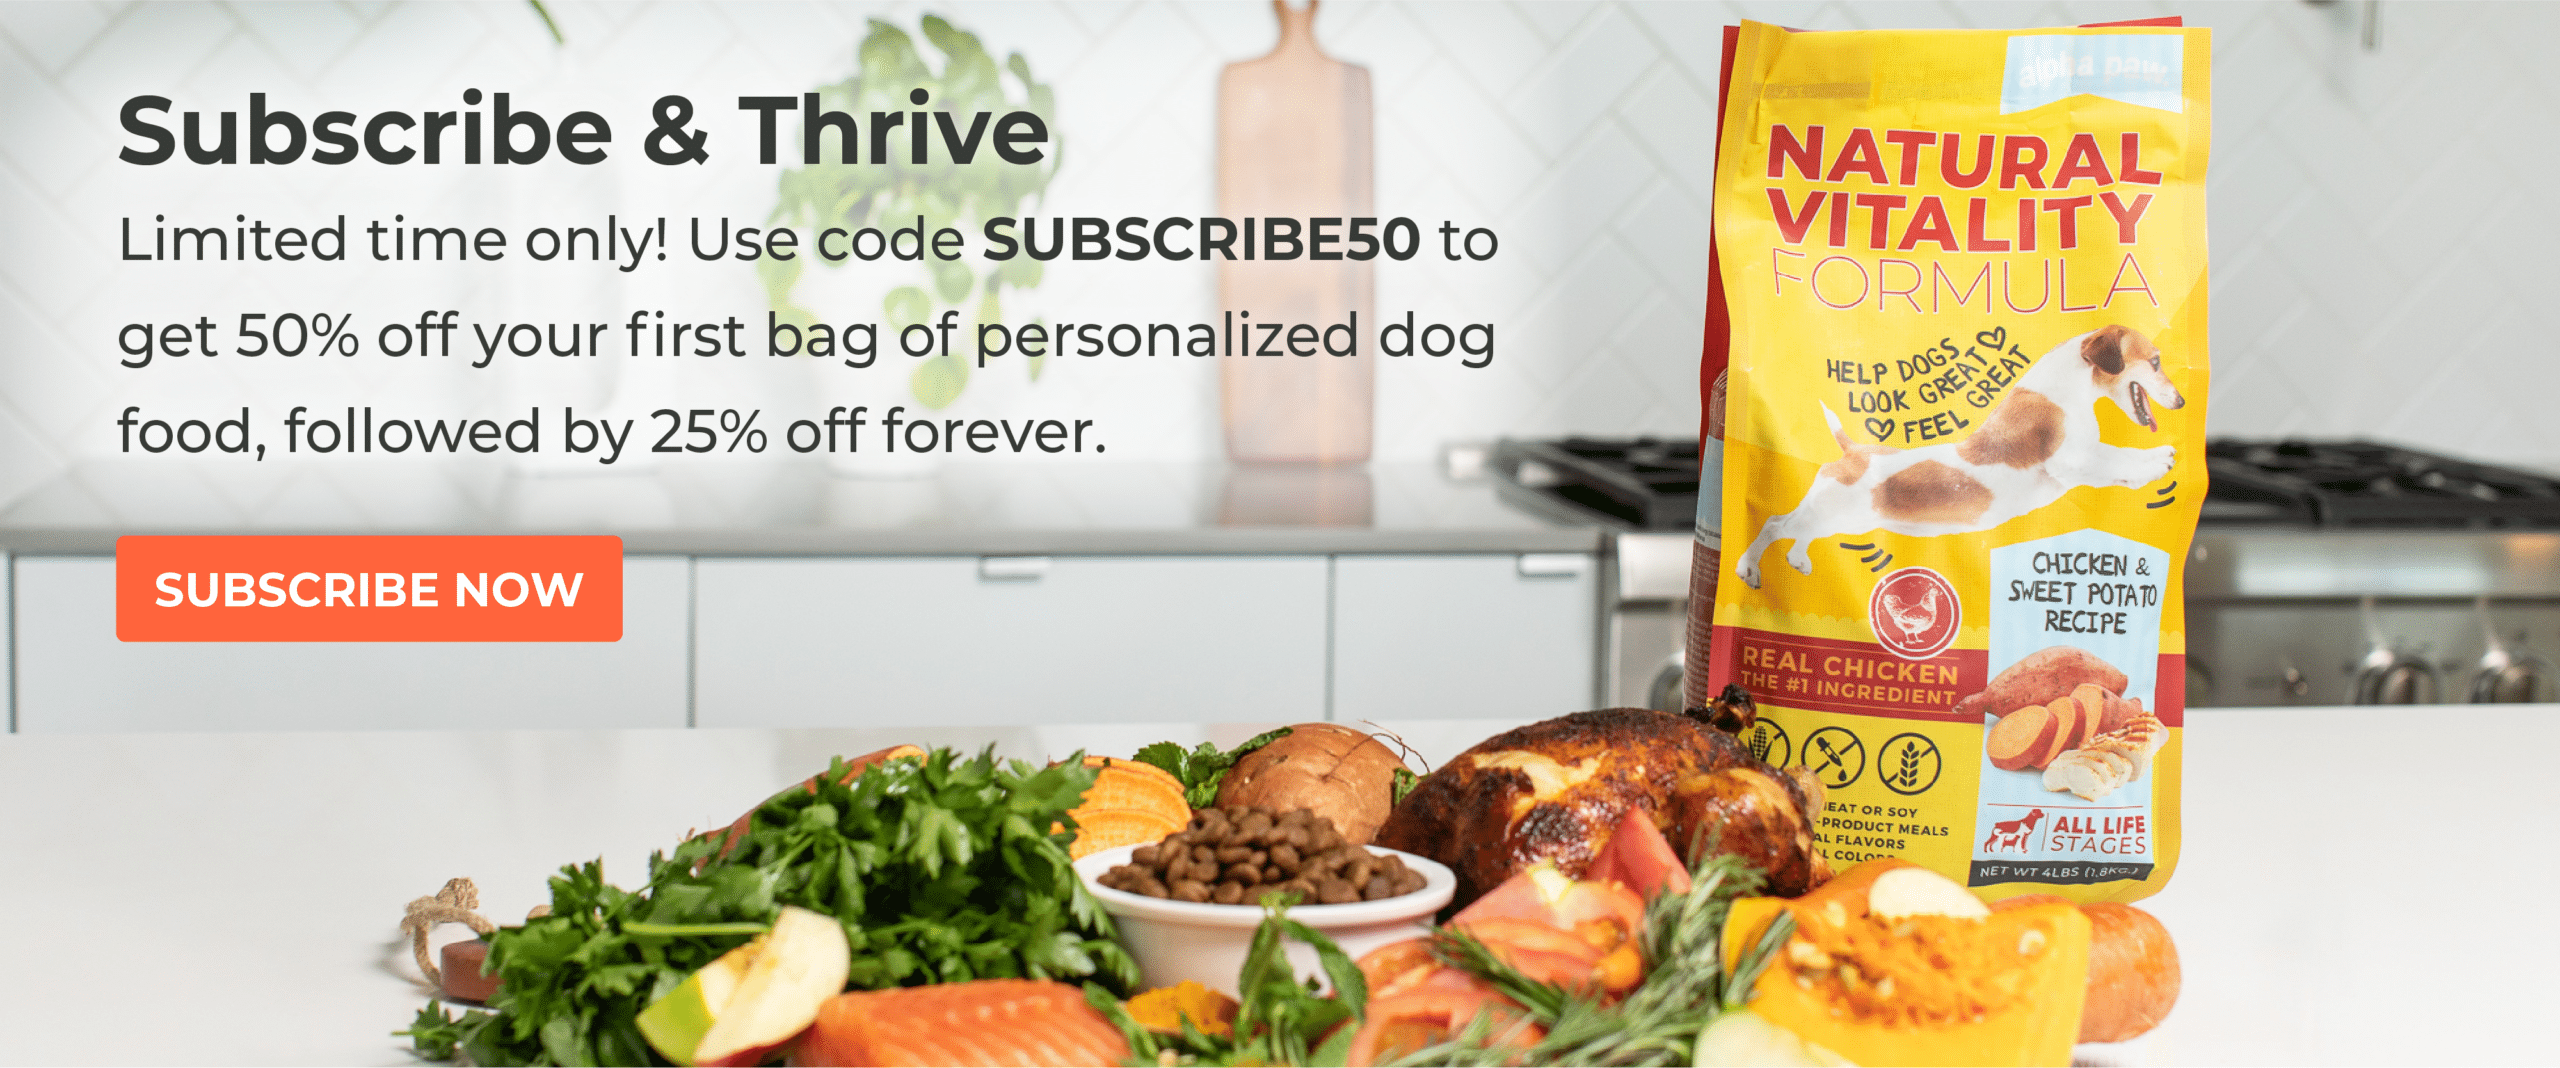 Nutra thrive bacon-flavored dog food supplement: an in-depth review